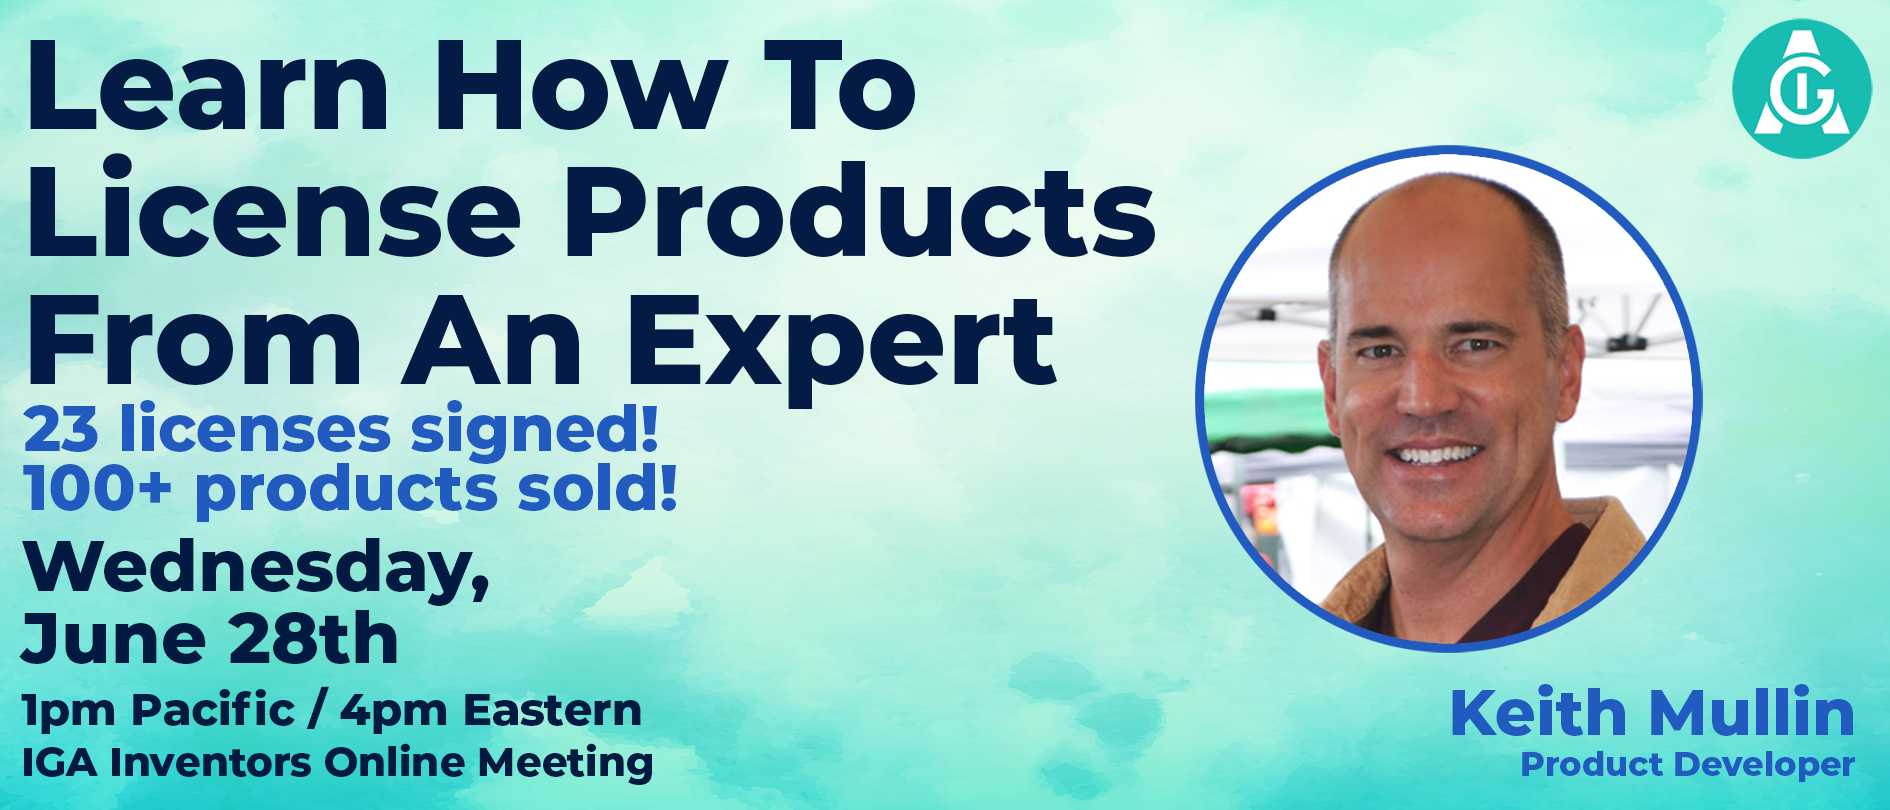 <h3><strong>Learn How To License Products From an Expert</strong></h3>